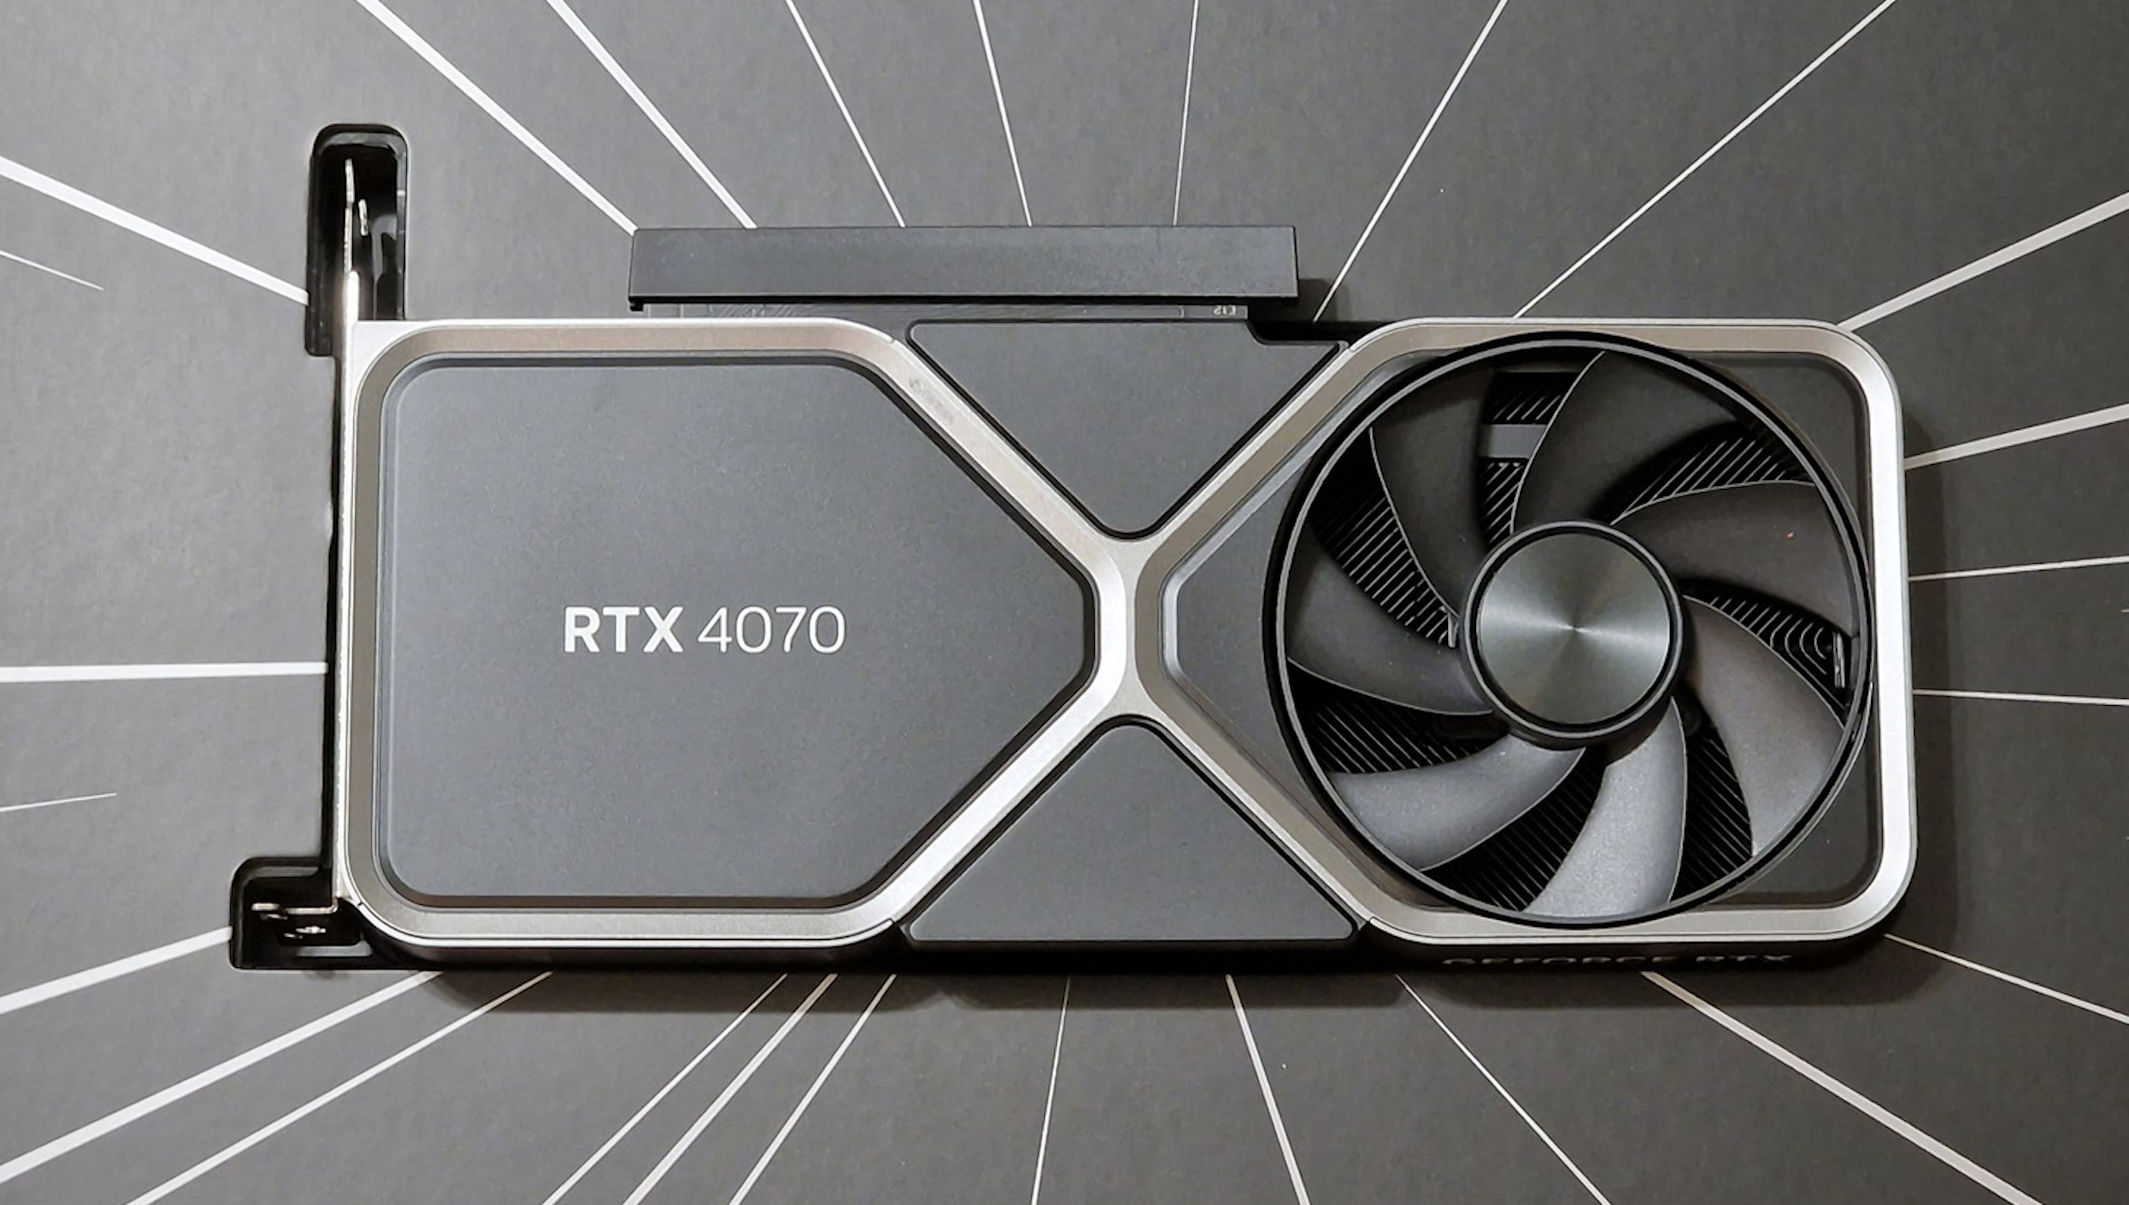 Literally no one wants to buy Nvidia's RTX 4060 Ti